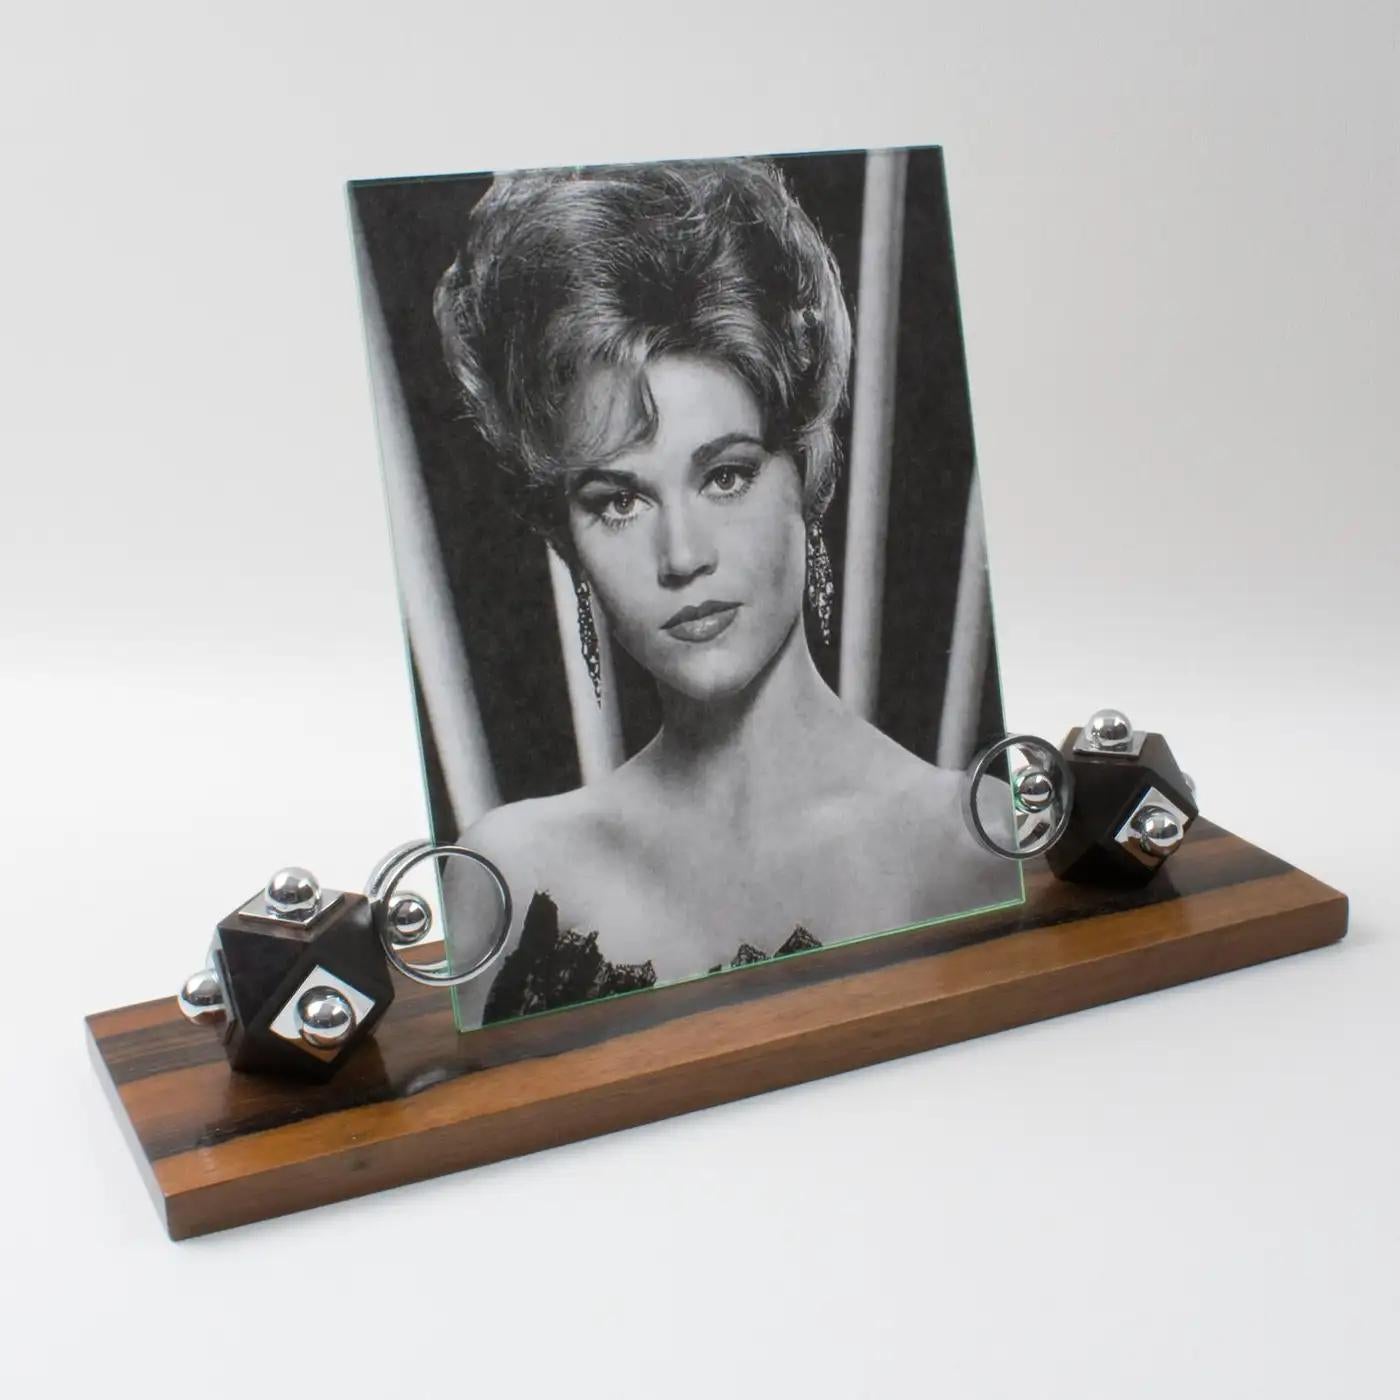 This Art Deco modernist picture frame features a thick hand-rubbed Macassar wood plinth complemented with cubic Macassar wood holders ornate with chrome accents. The photo frame is complete with two glass sheets to enclose the photography. There is